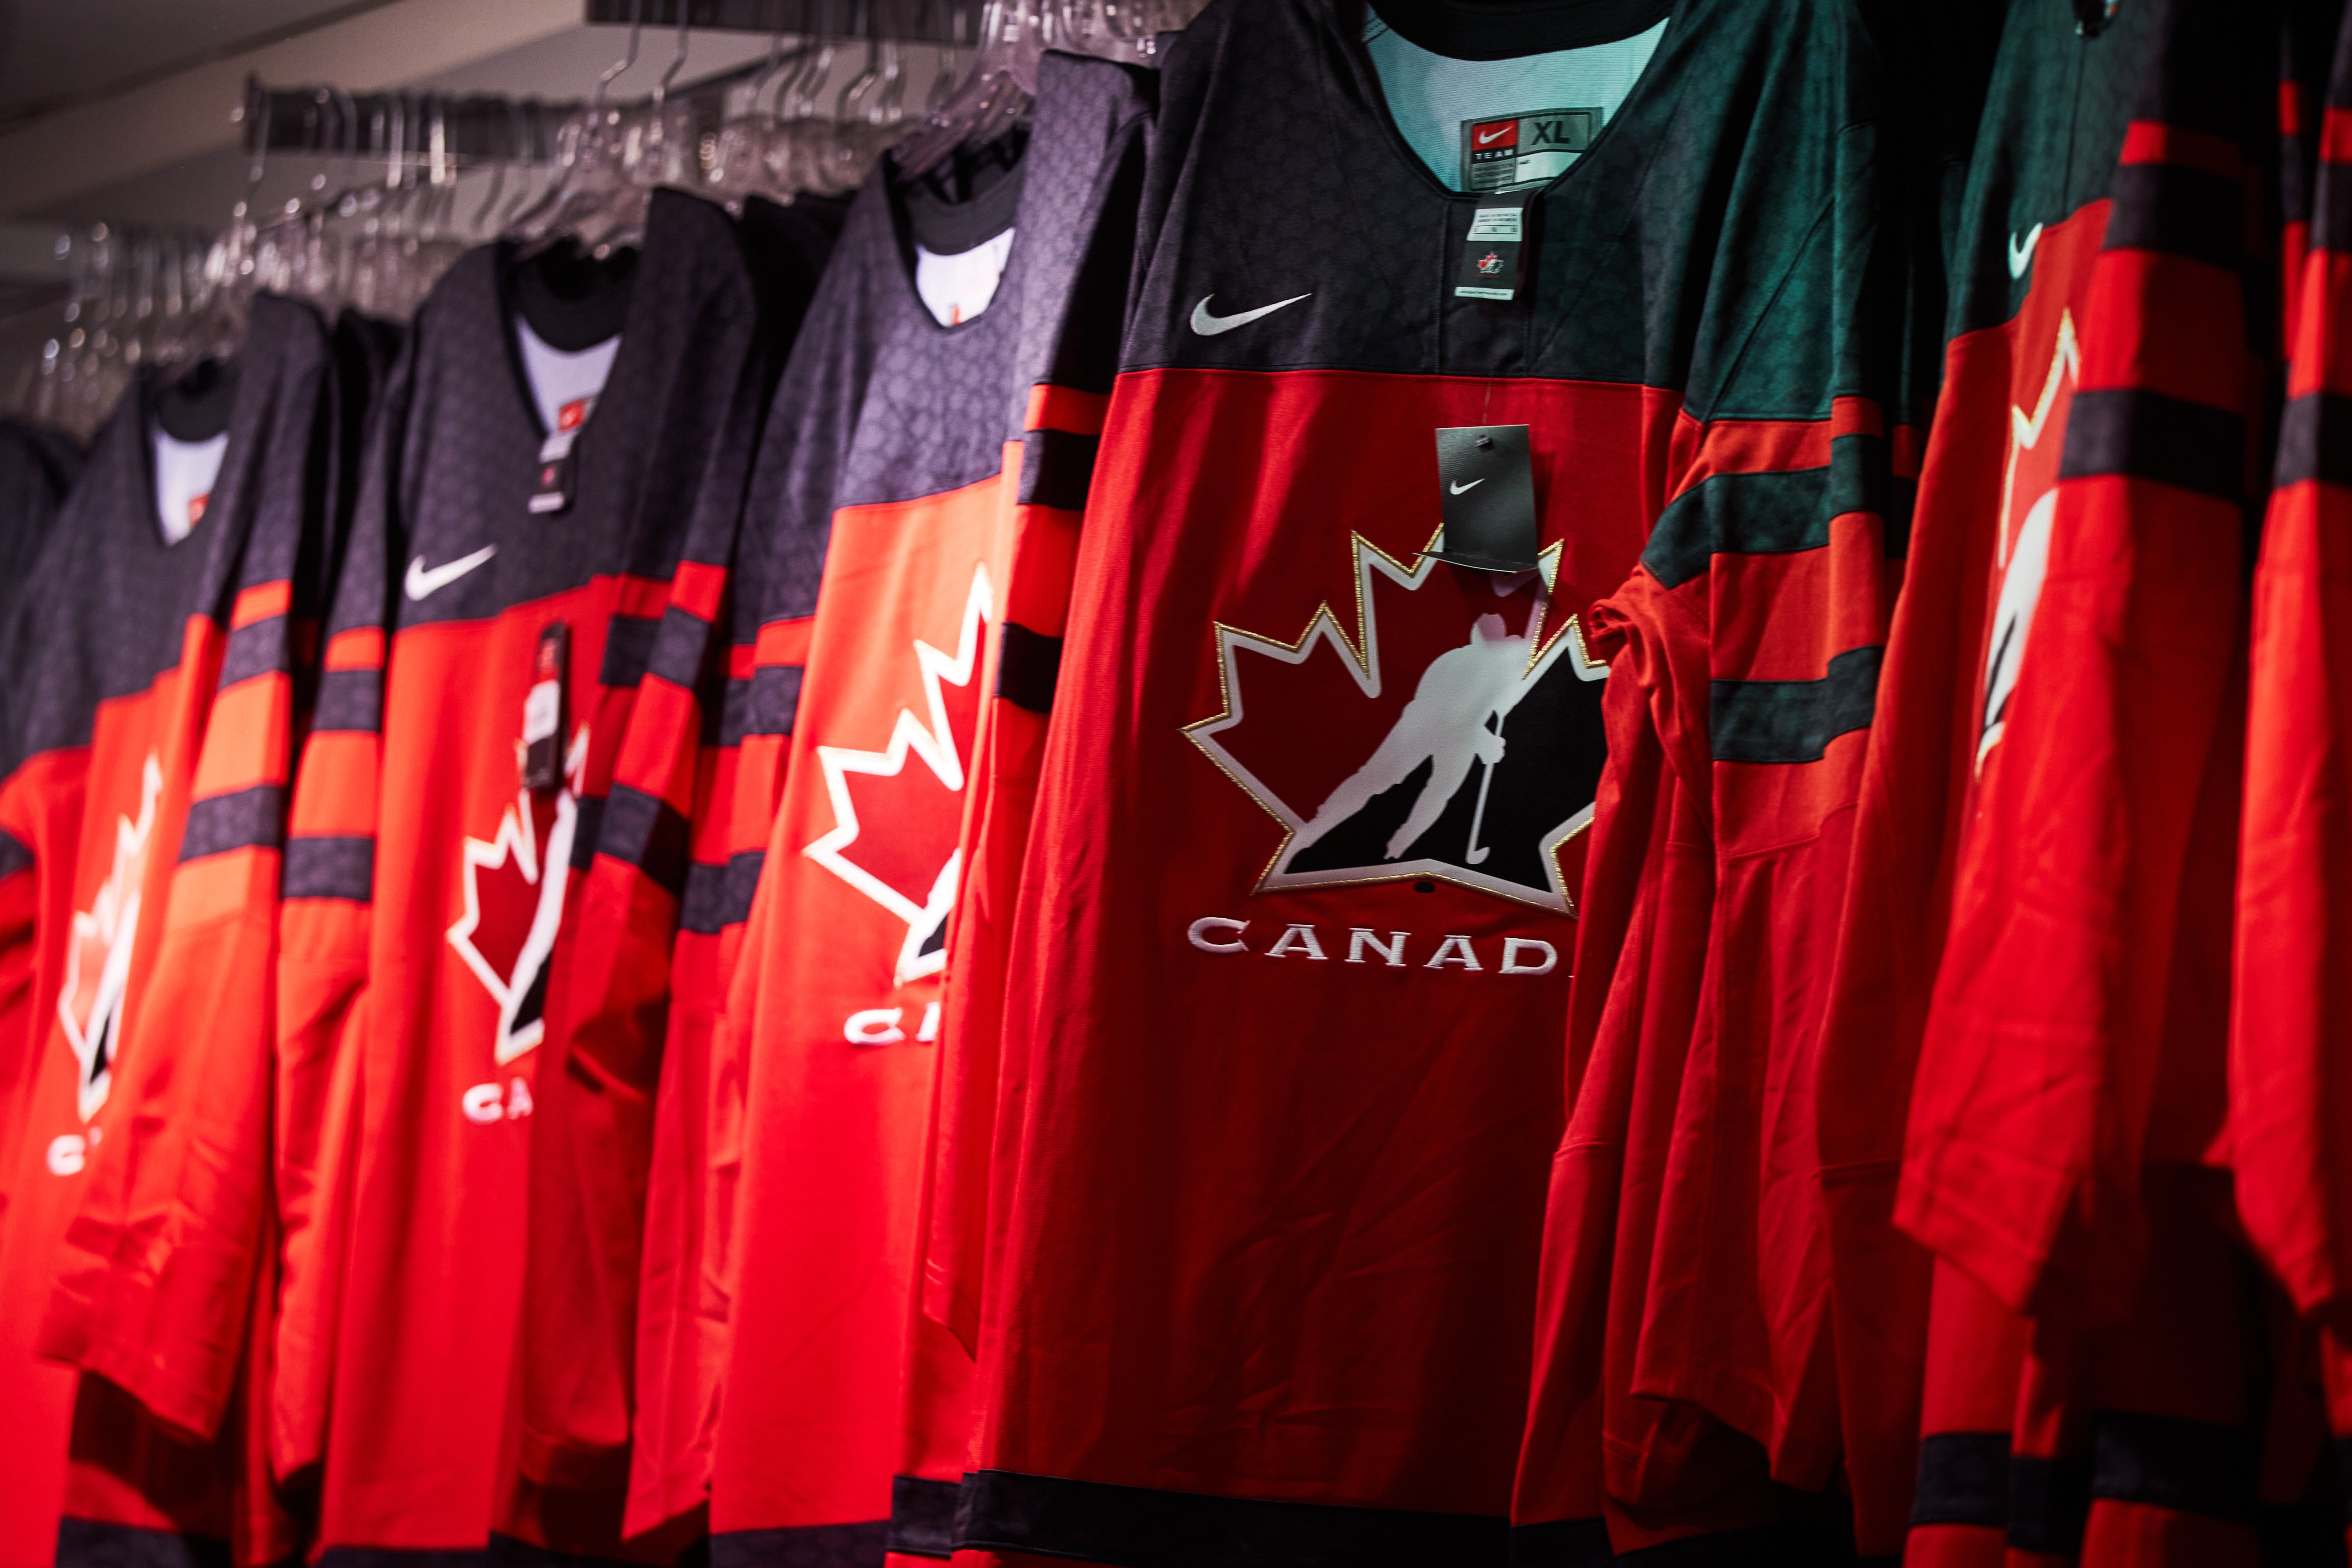 Hockey Canada has lost nearly $24 million in sponsorships this